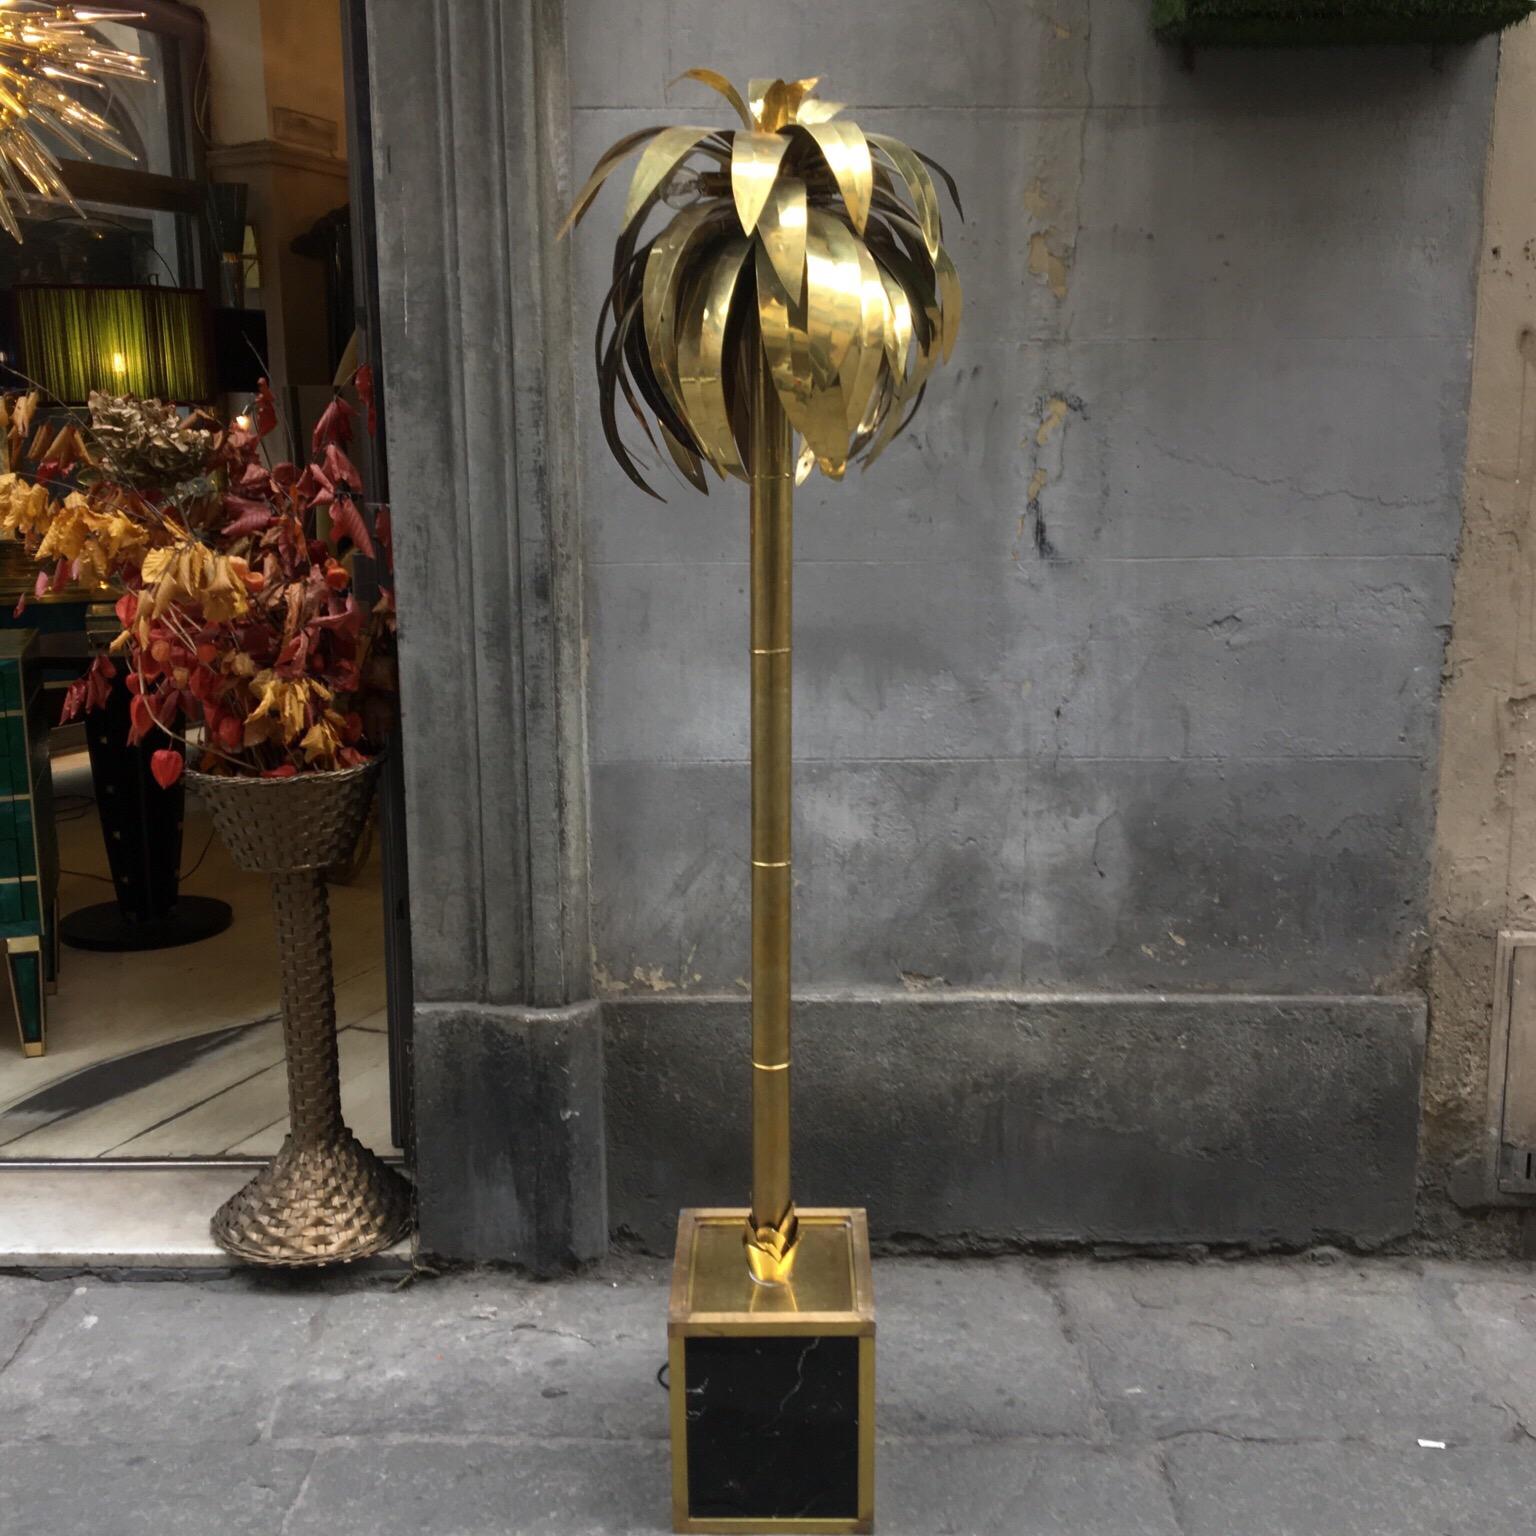 Tall brass palm tree floor lamp with a bamboo upright, brass leaves and black marble rectangular base, signed by Maison Jansen. Five lamps, 4 lamps around the tuft of the plant and one lamp above it. The item shows normal signs of age and use.